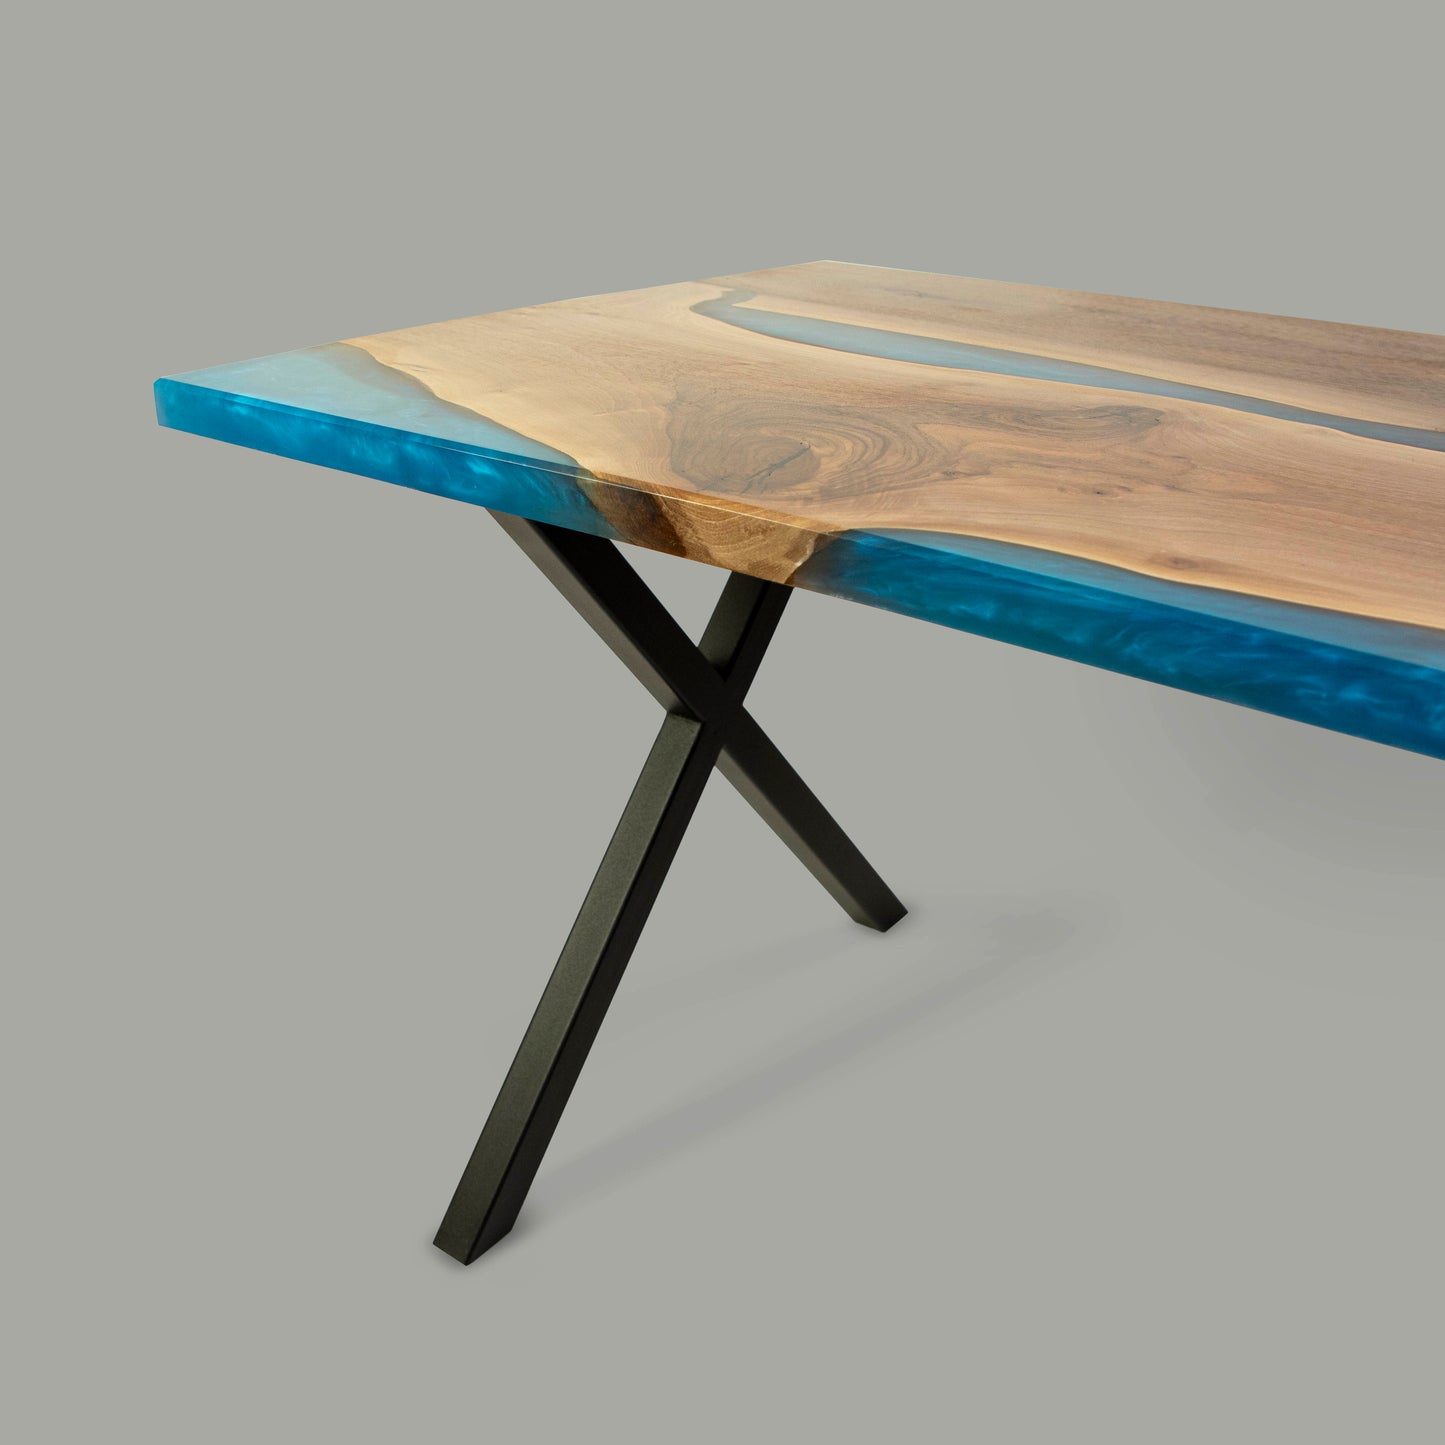 Dining table made from wood and epoxy resin in the color classic blue